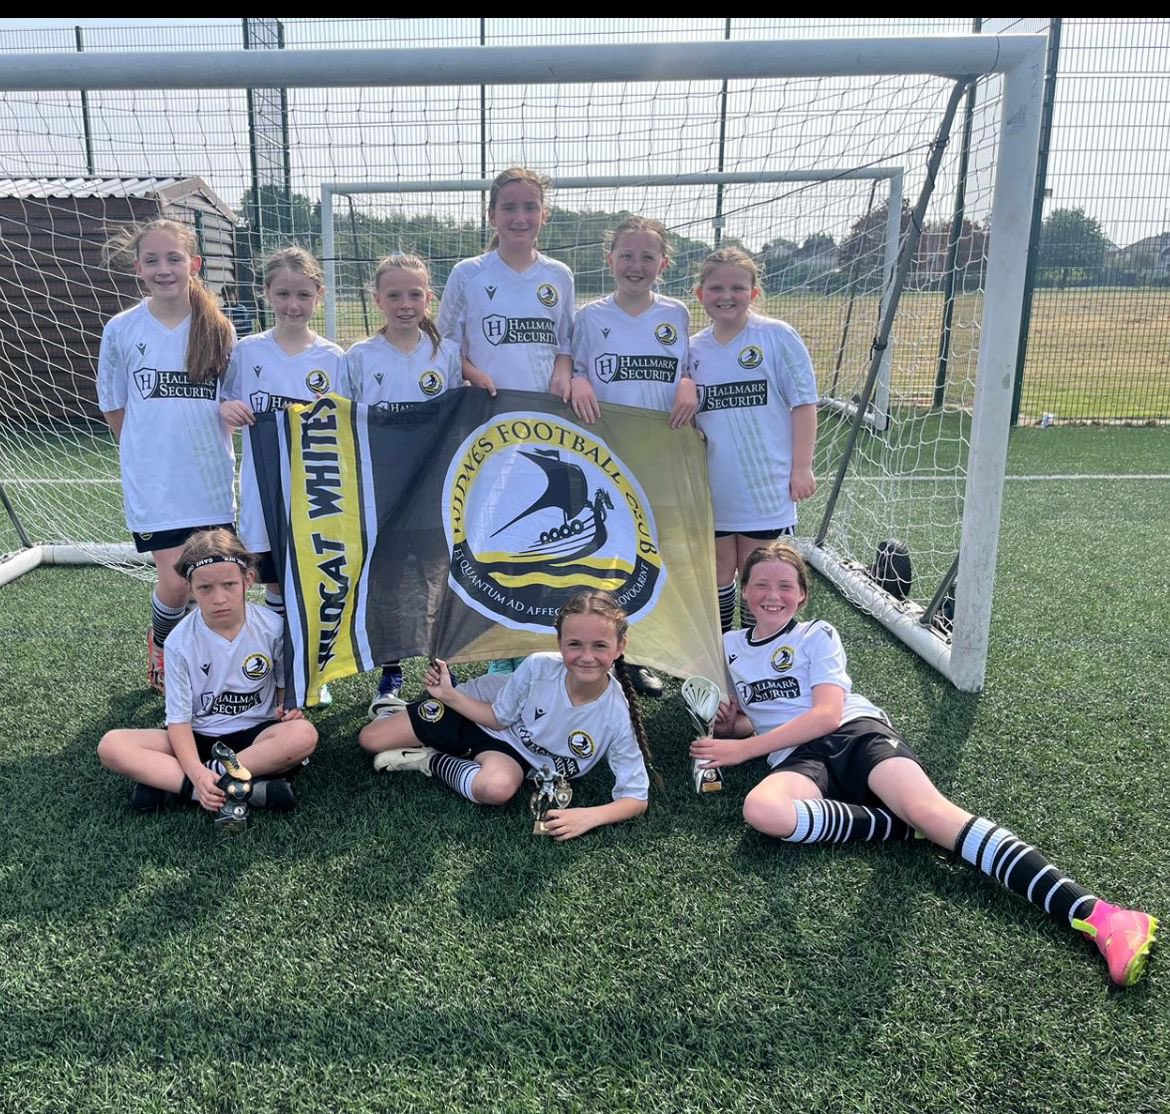 A fantastic last game of the season against Cadishead for our U10 Wildcats. Always a good battle between these two teams. The girls are looking forward to moving to 9 aside next season. 💪